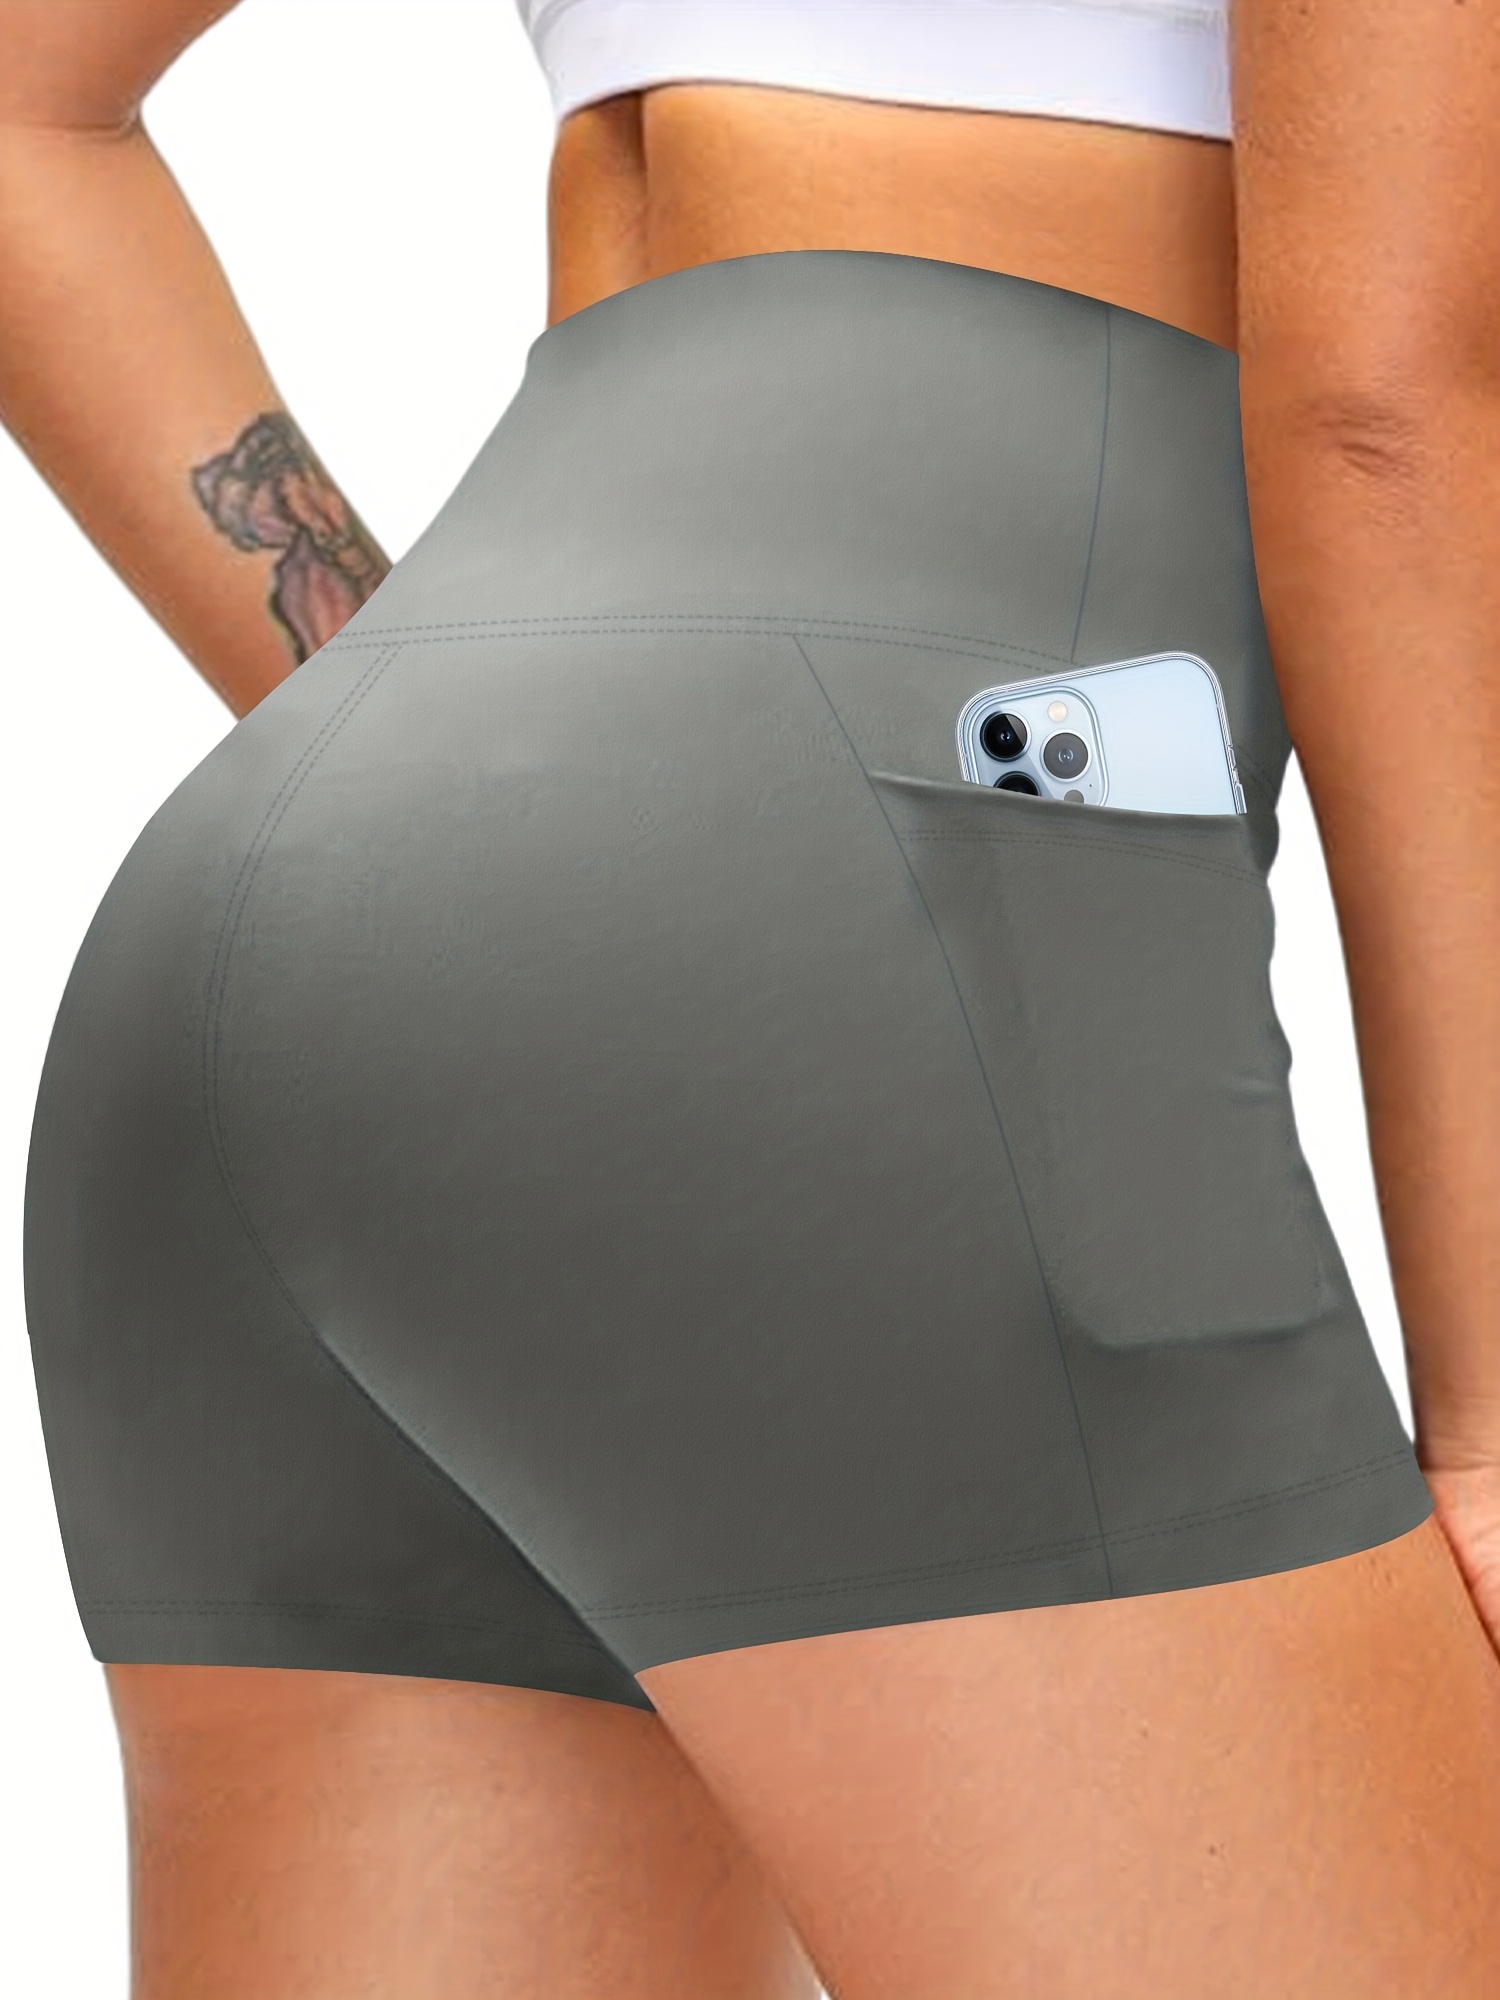 Yoga Shorts for Women (Wide Waistband) from: Small-XL in Many